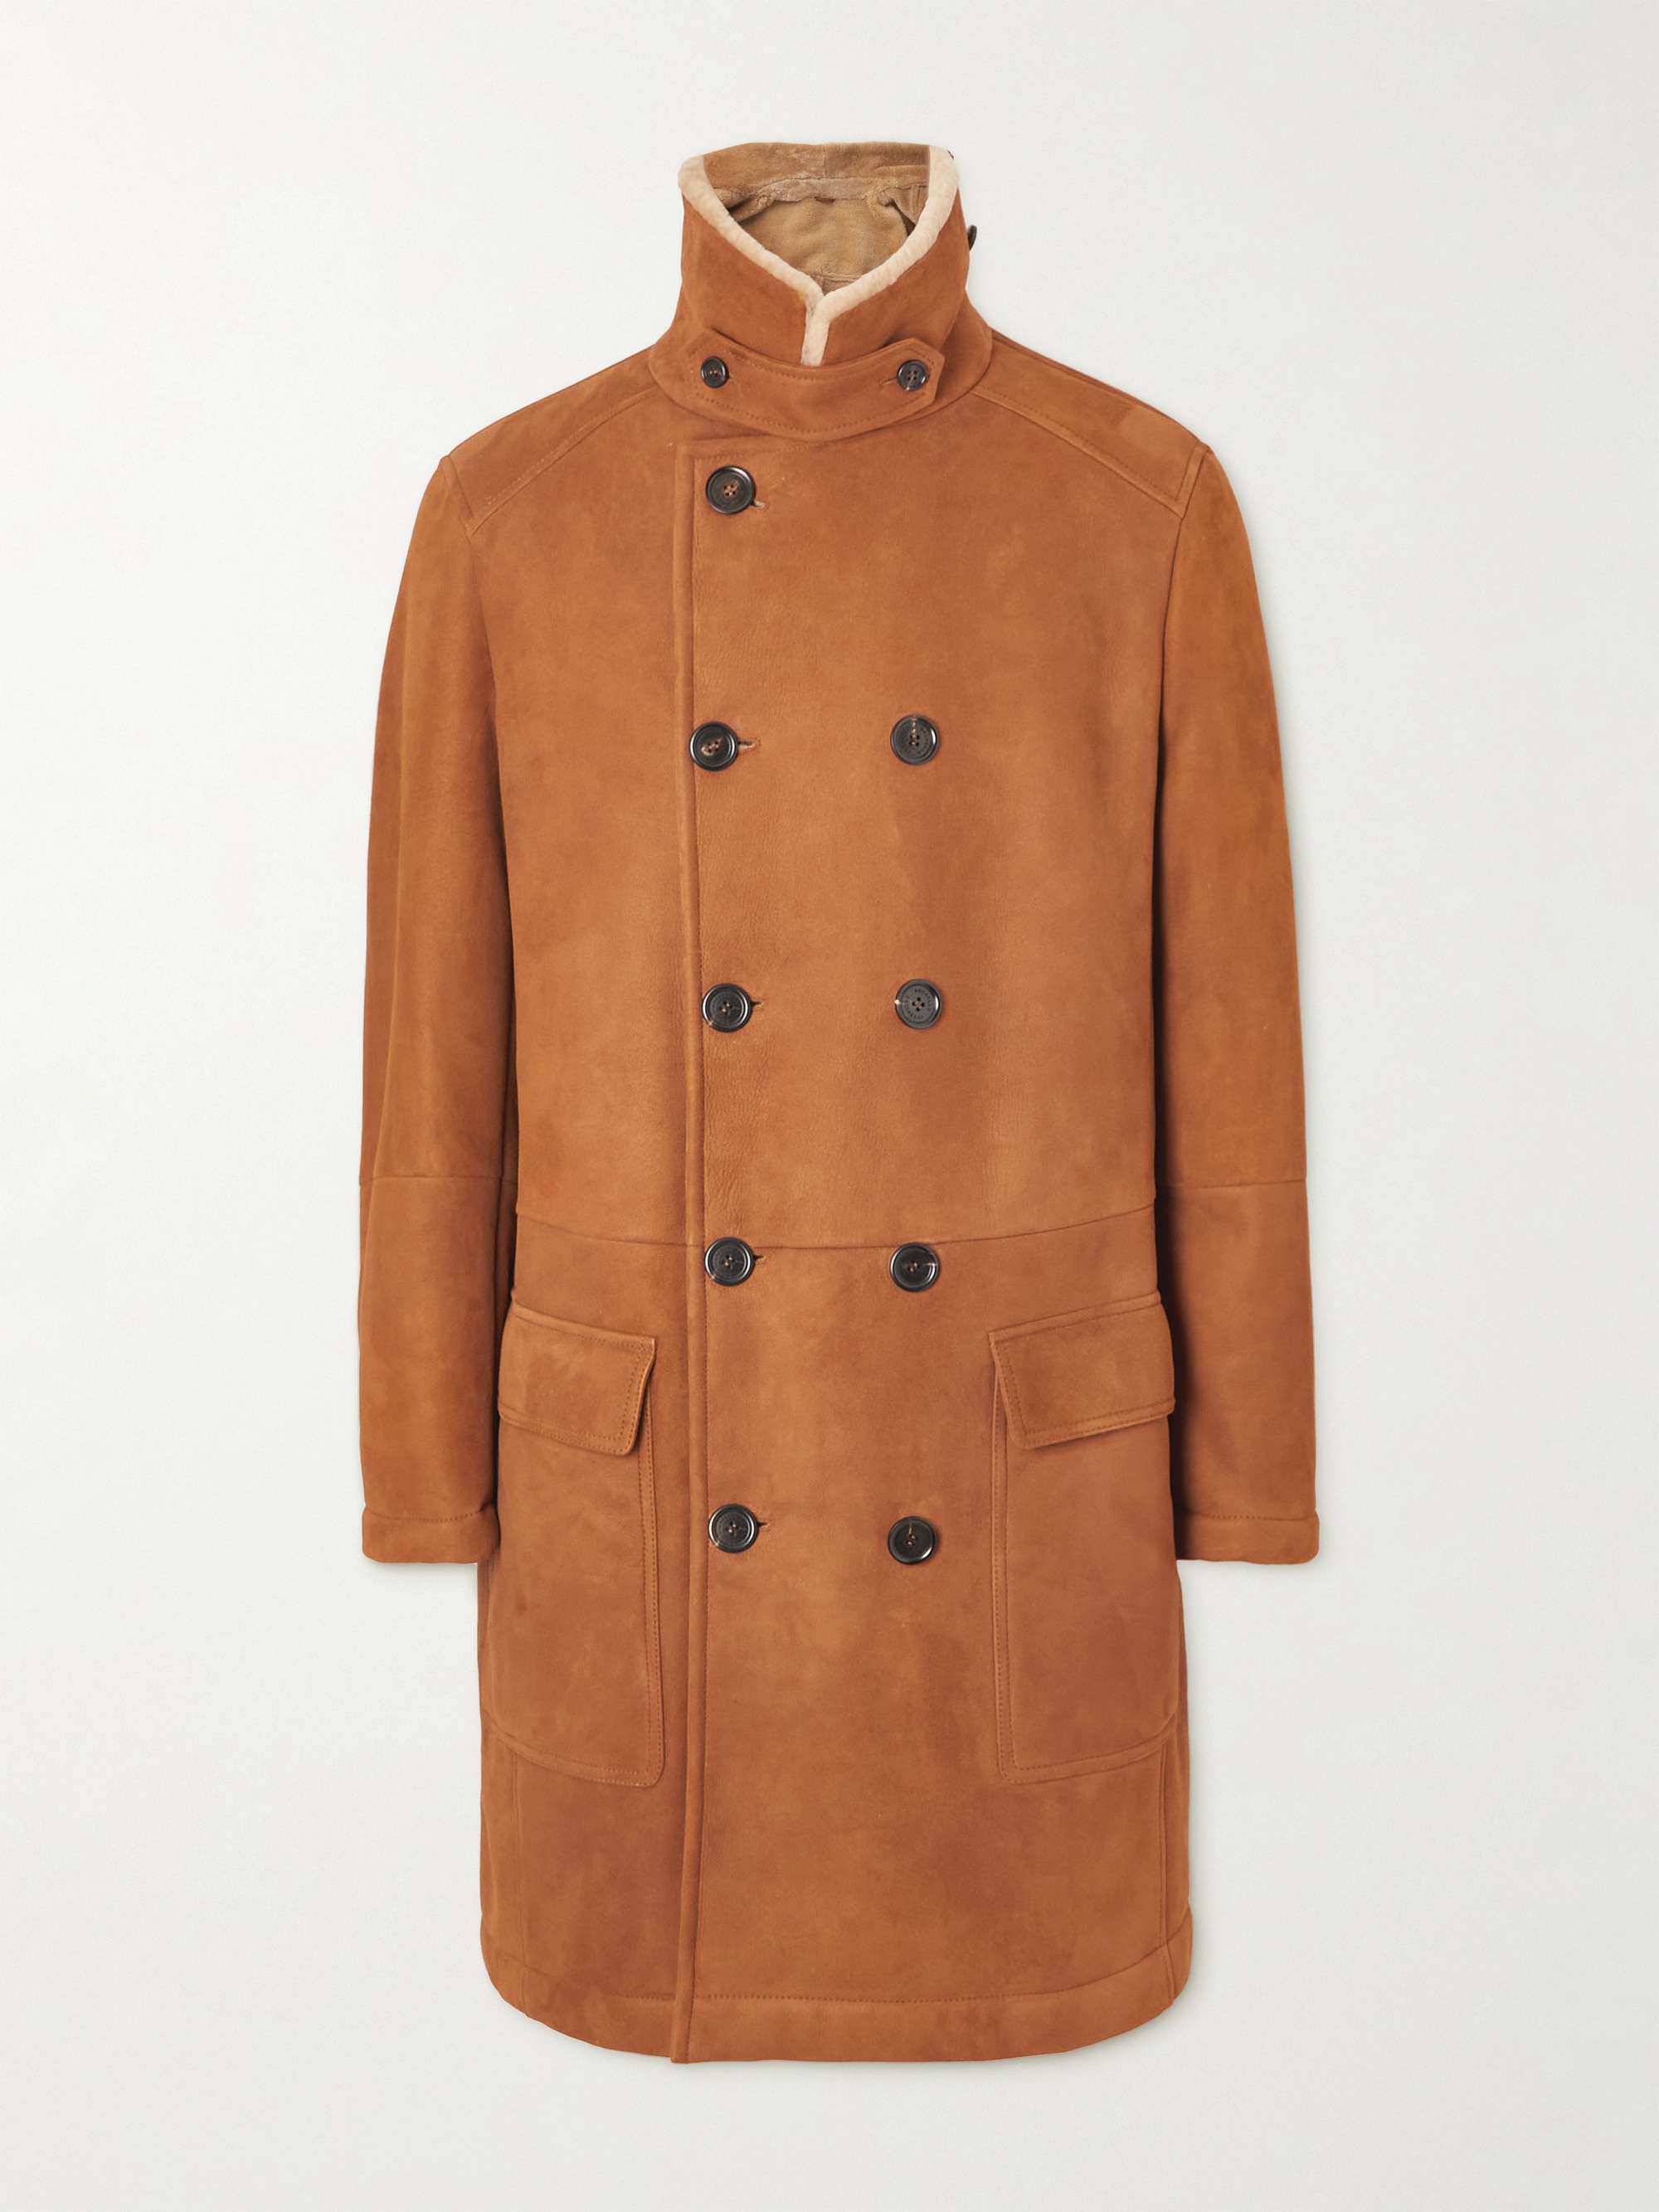 BRUNELLO CUCINELLI Double-Breasted Shearling Coat